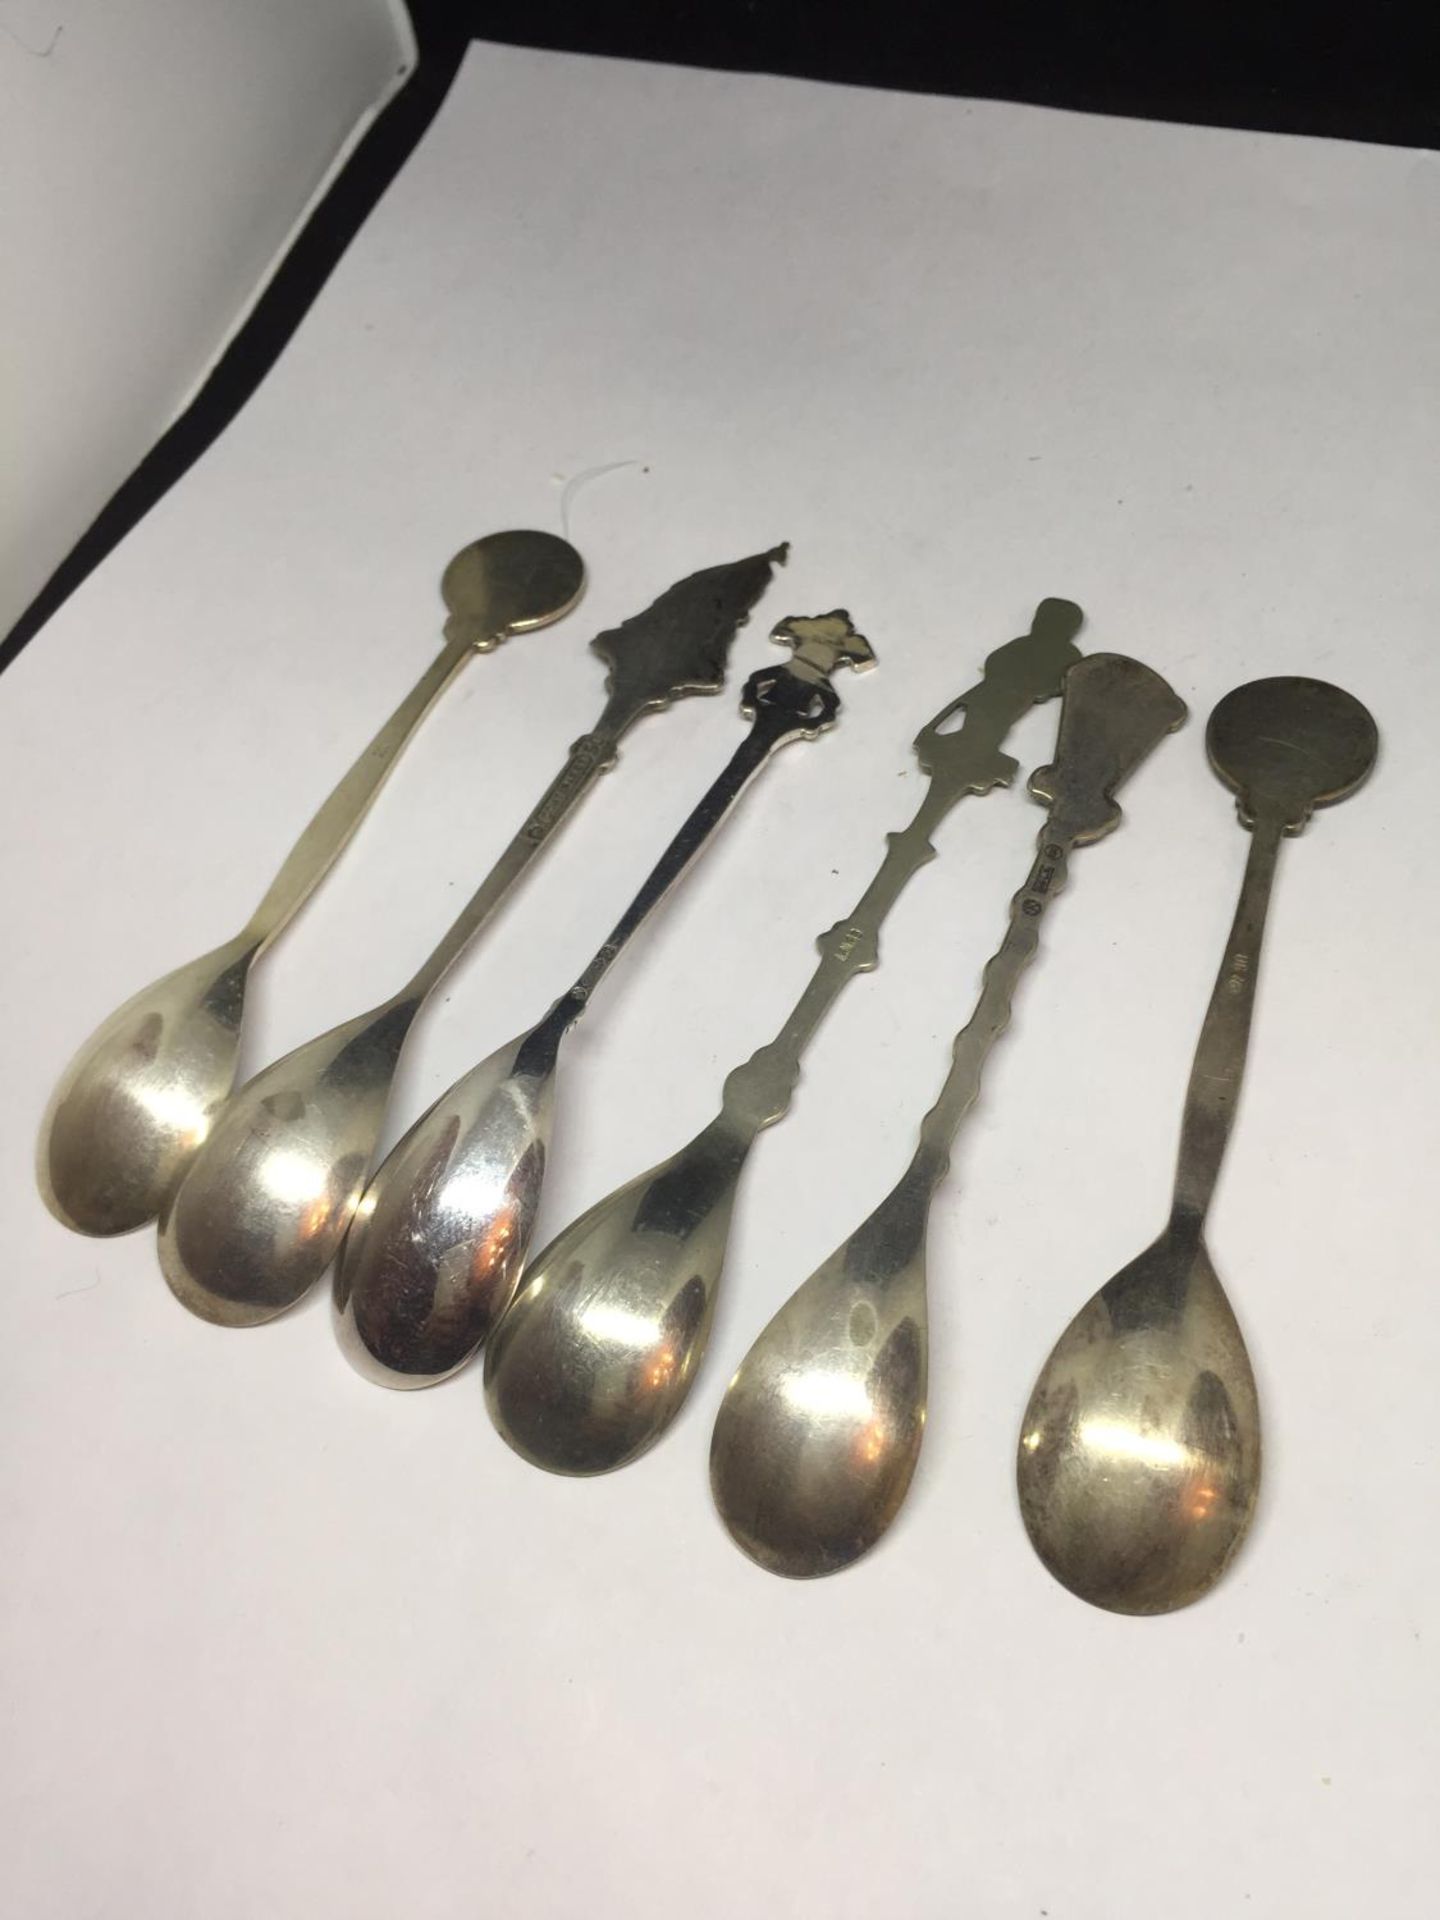 SIX ORNATE COLLECTORS SPOONS - Image 5 of 5